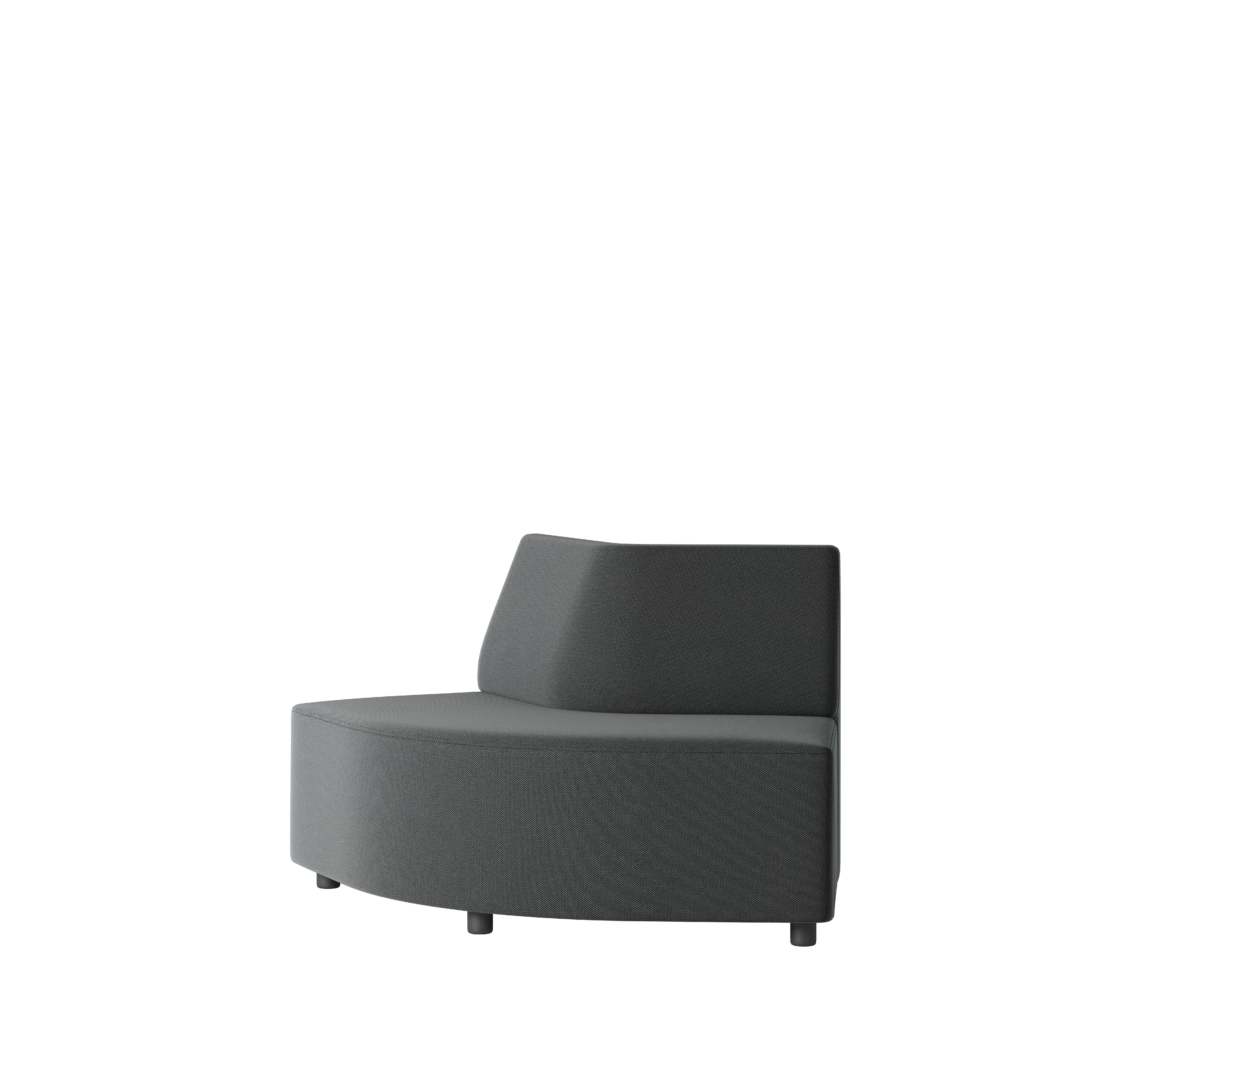 OCEE&FOUR – Soft Seating – FourLikes Sofa – 120 Convex Low Back - Packshot Image 1